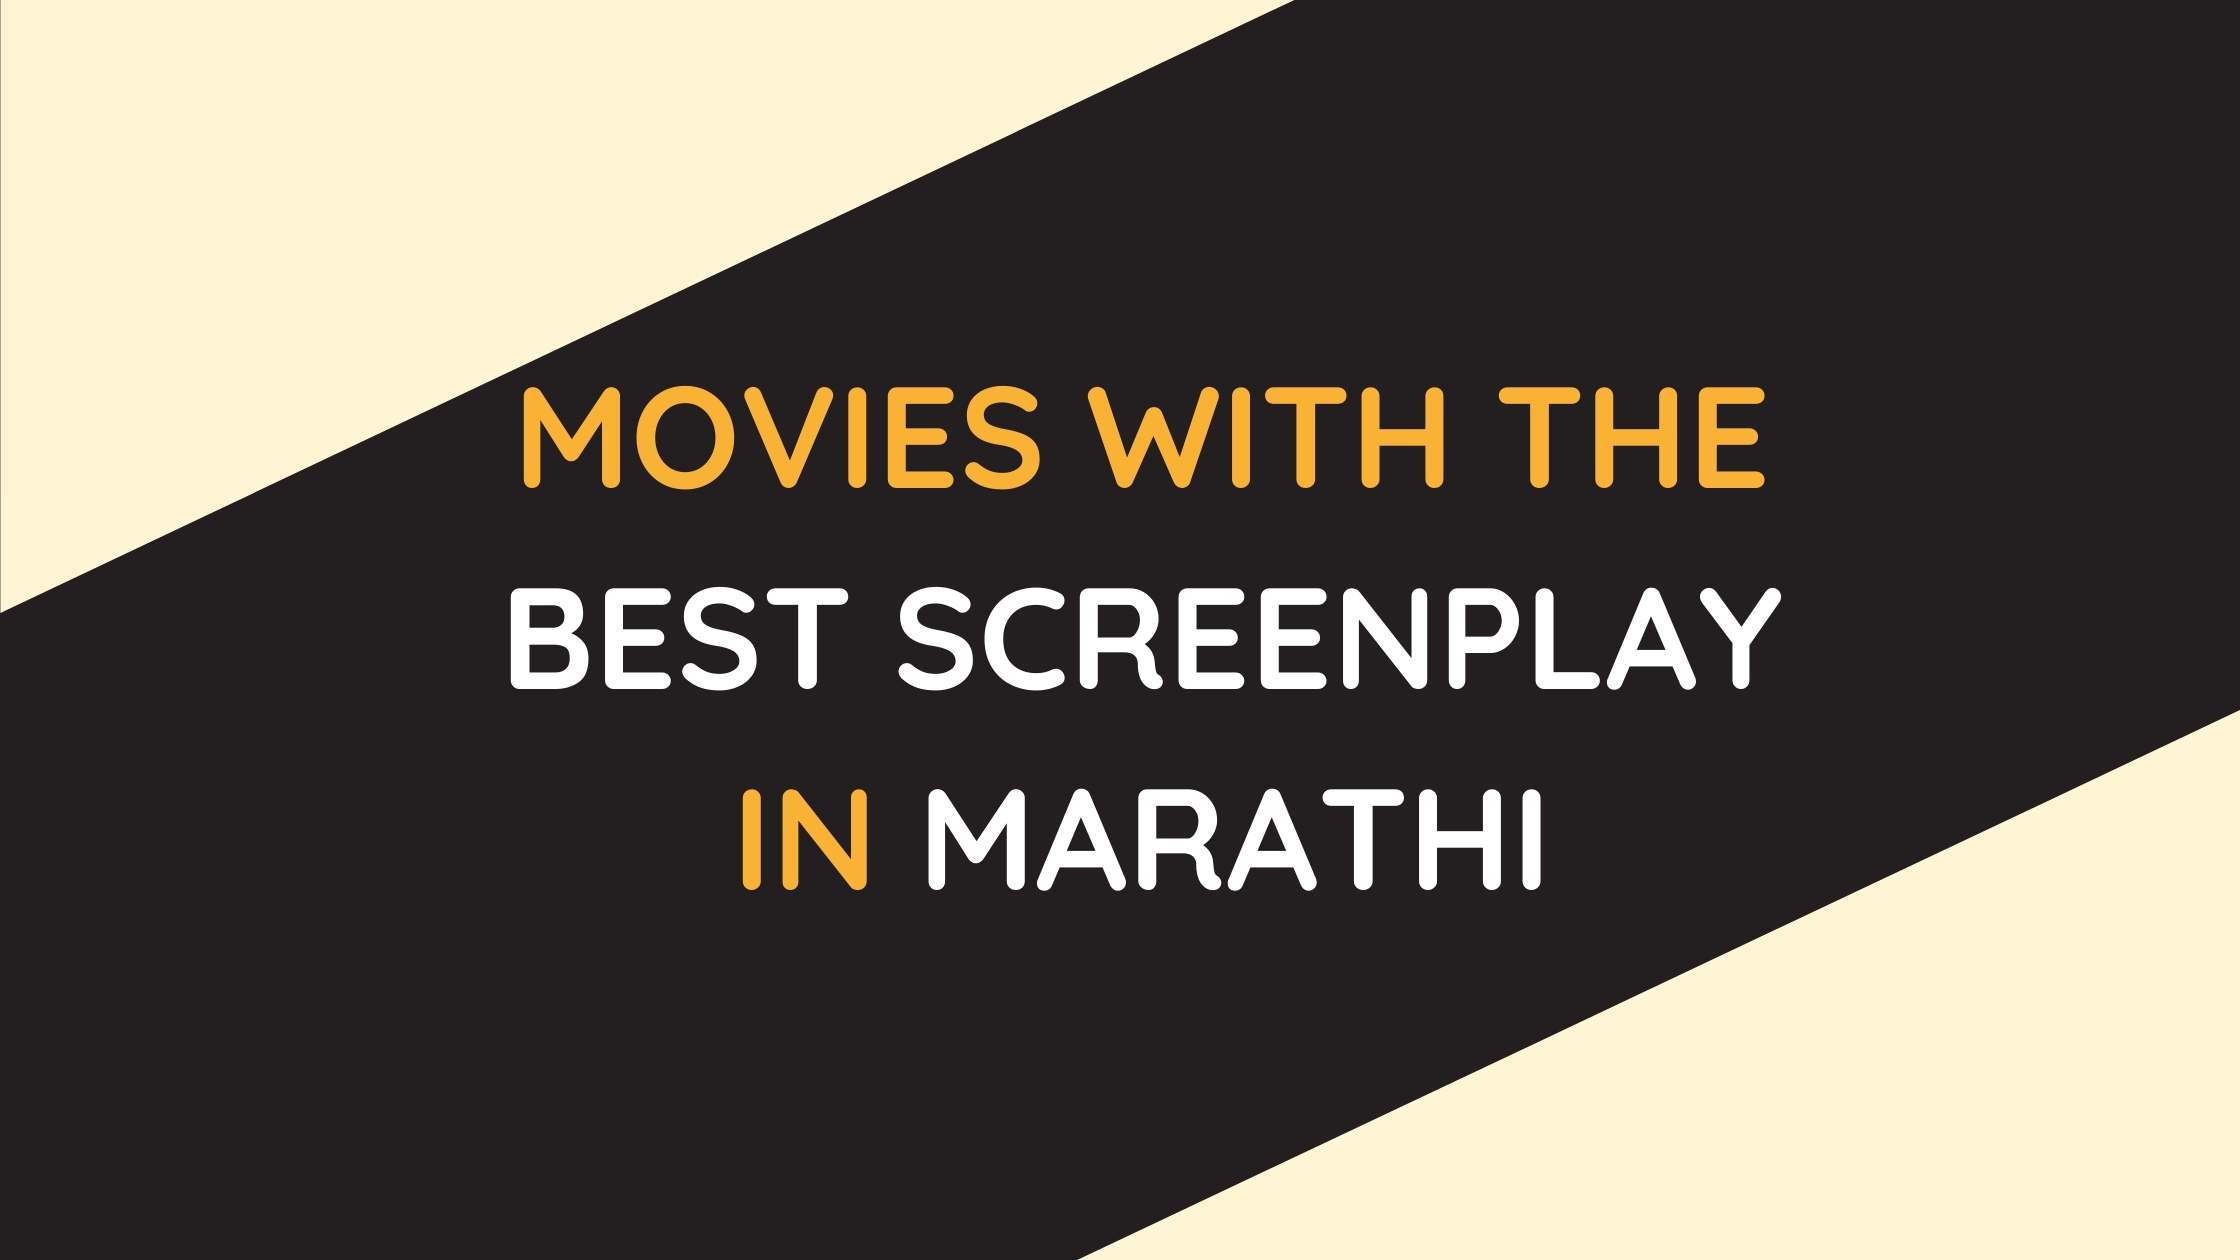 Marathi movies with the best screenplay